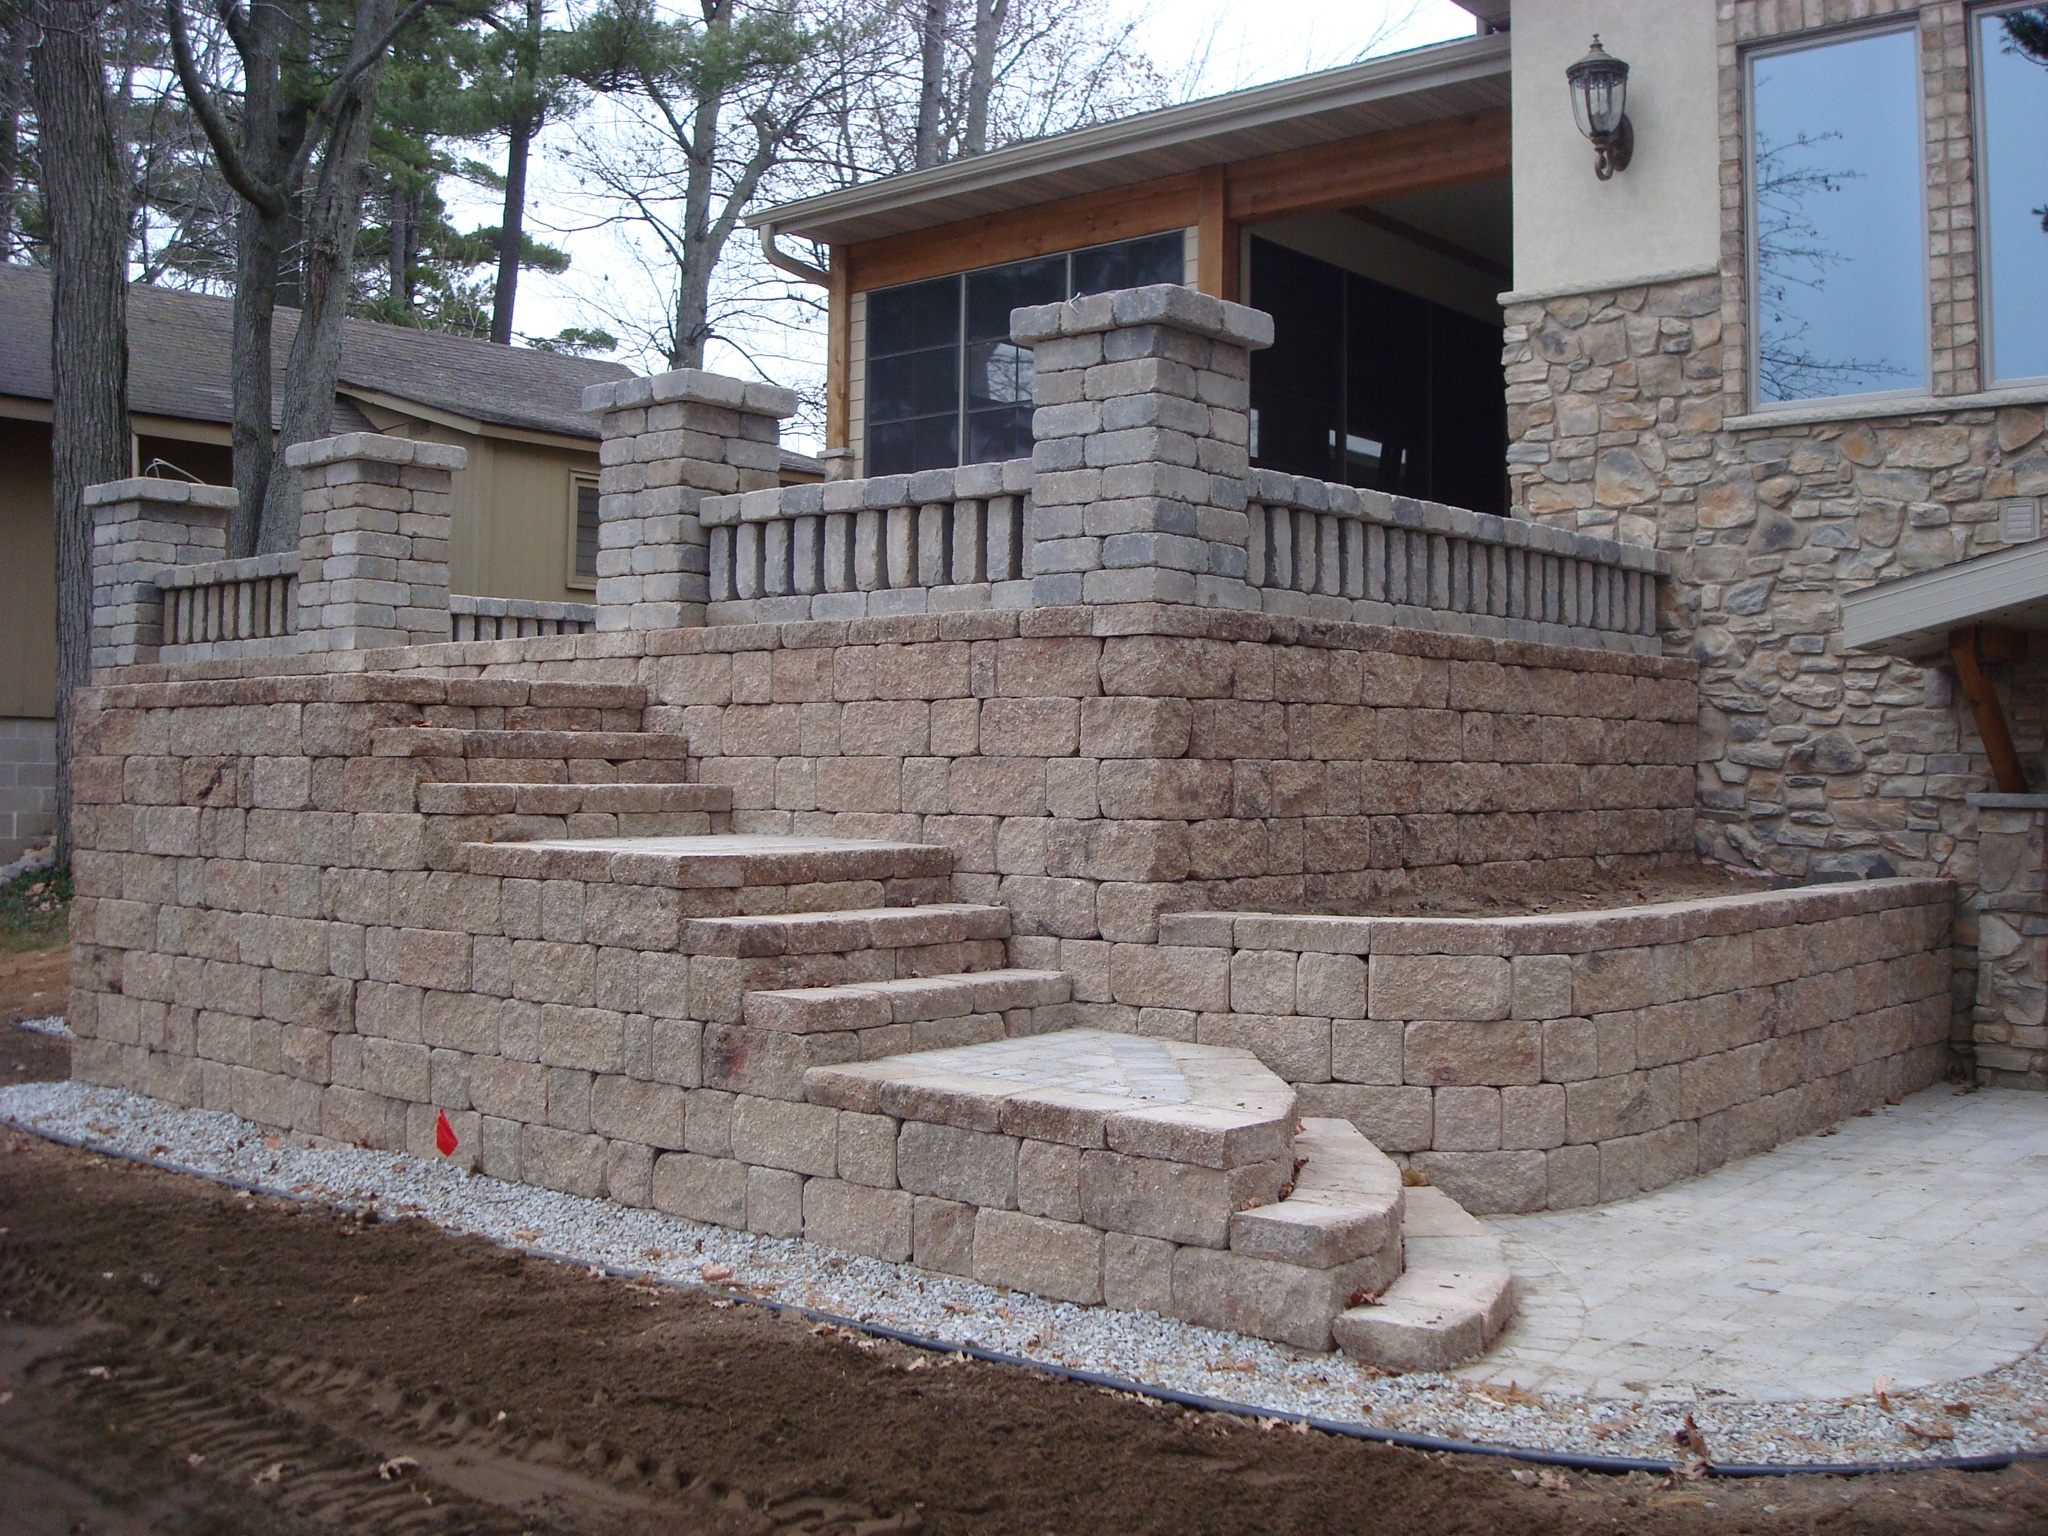 brick retaining walls with short rock steps leading up to patio